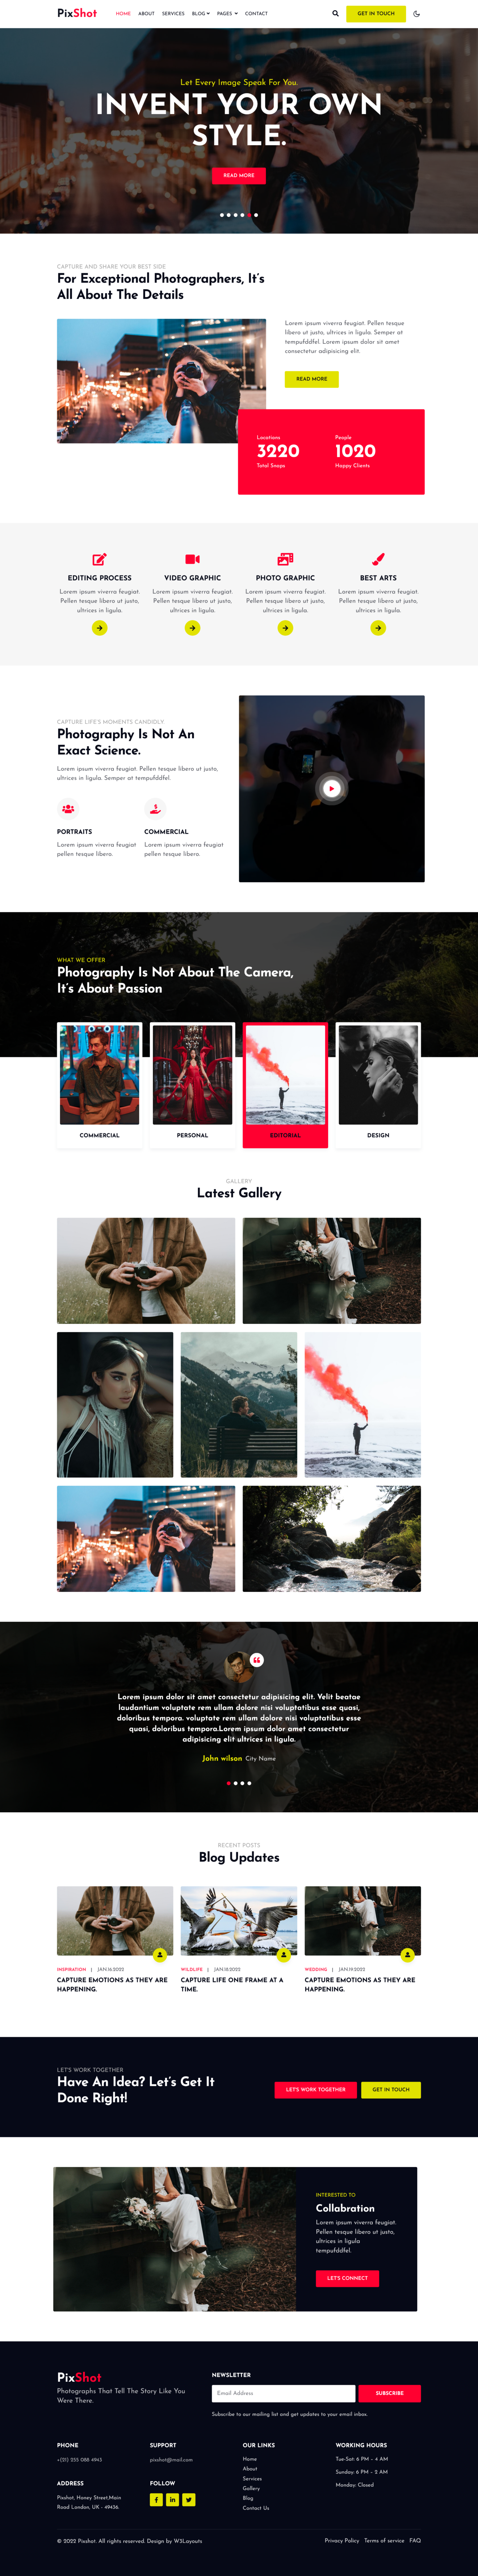 PixShot a website template for photo gallery